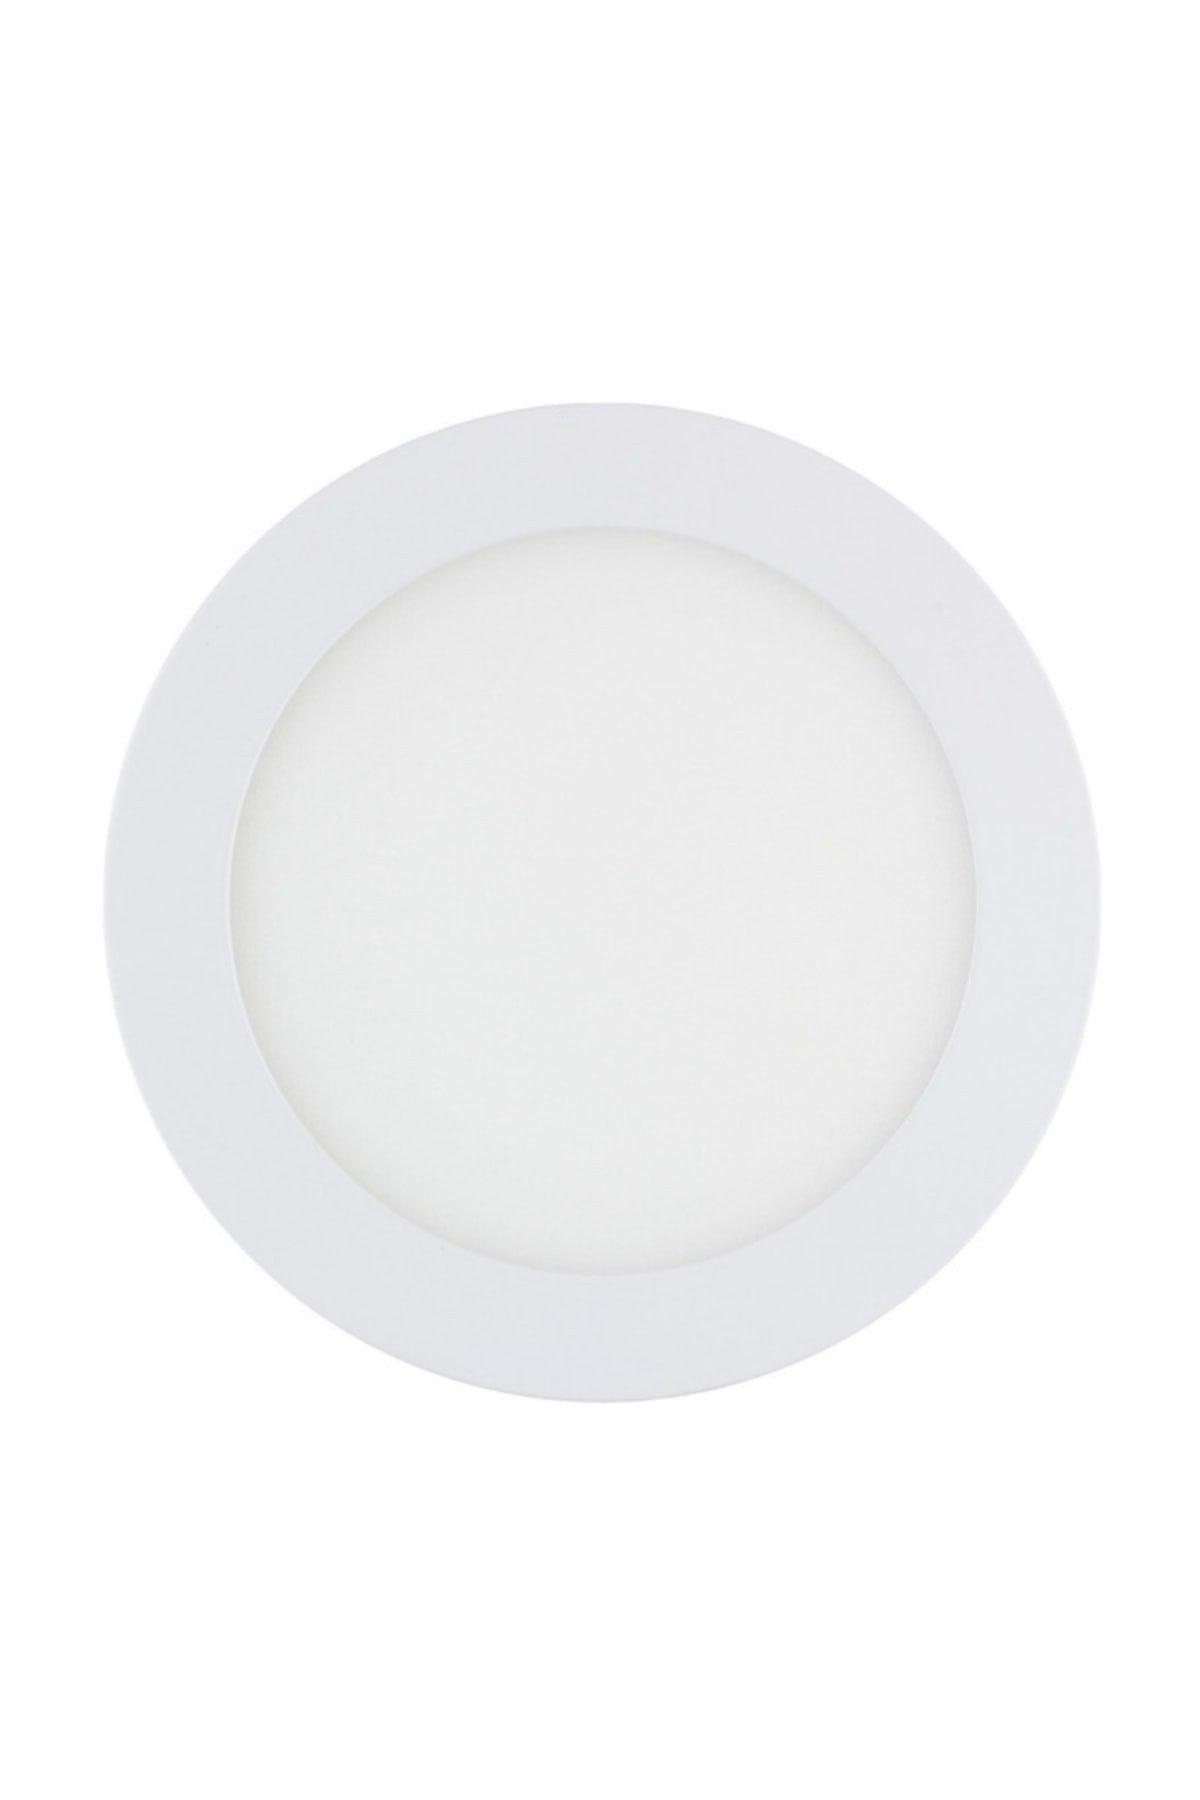 6w Recessed Led Panel Deluxe Daylight (5pcs) - Swordslife